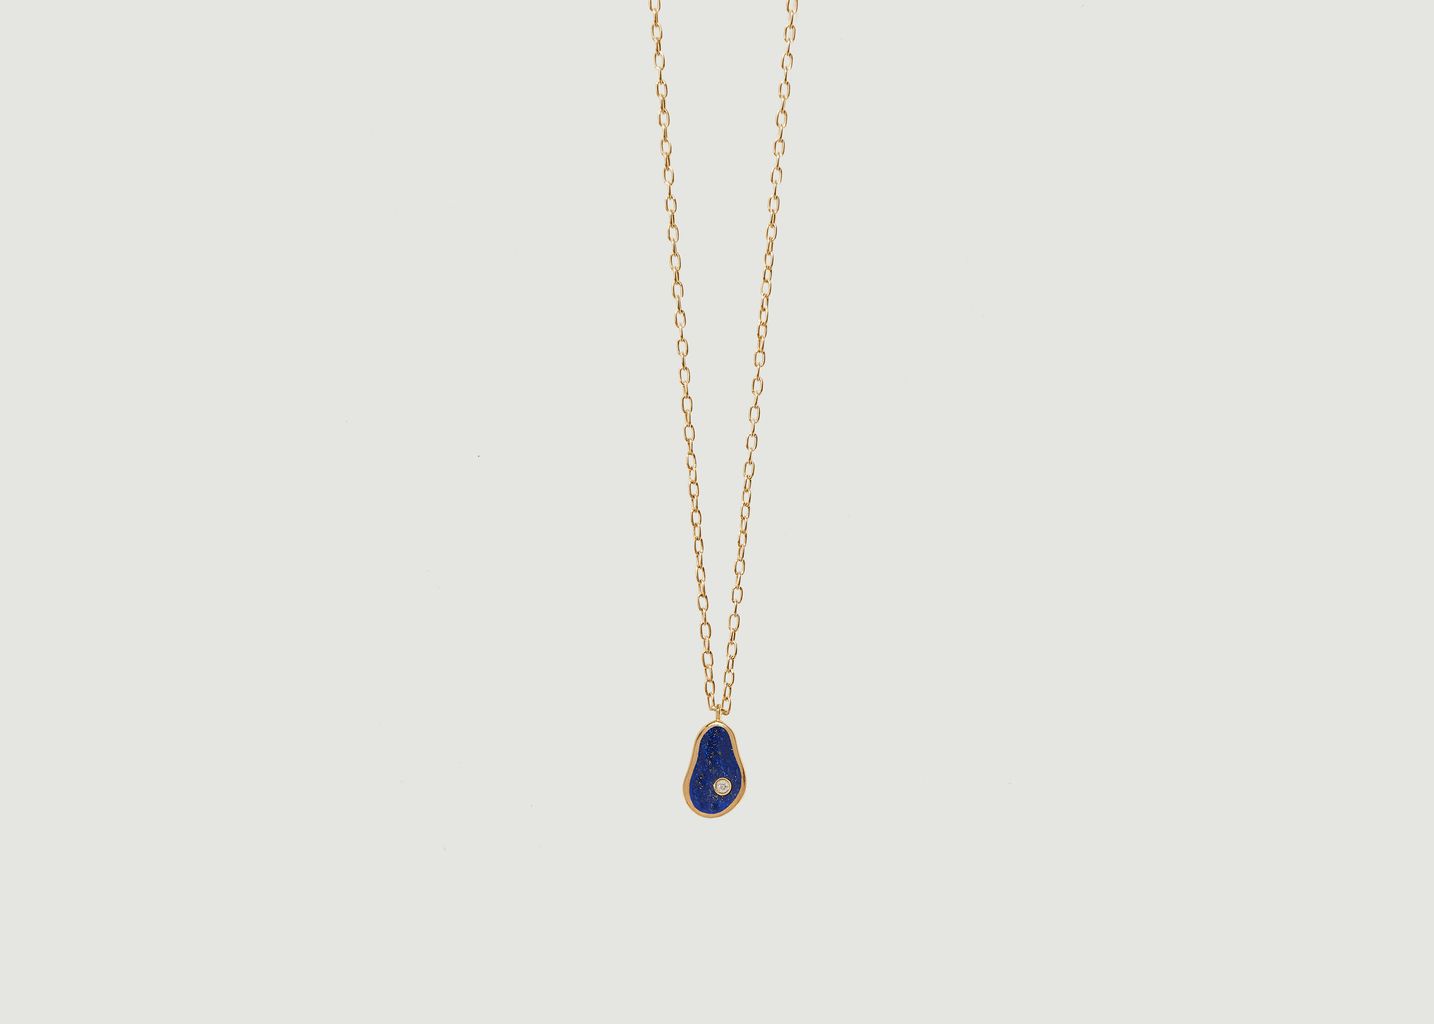 Pilar II gold plated brass chain necklace with pendant - Pamela Love